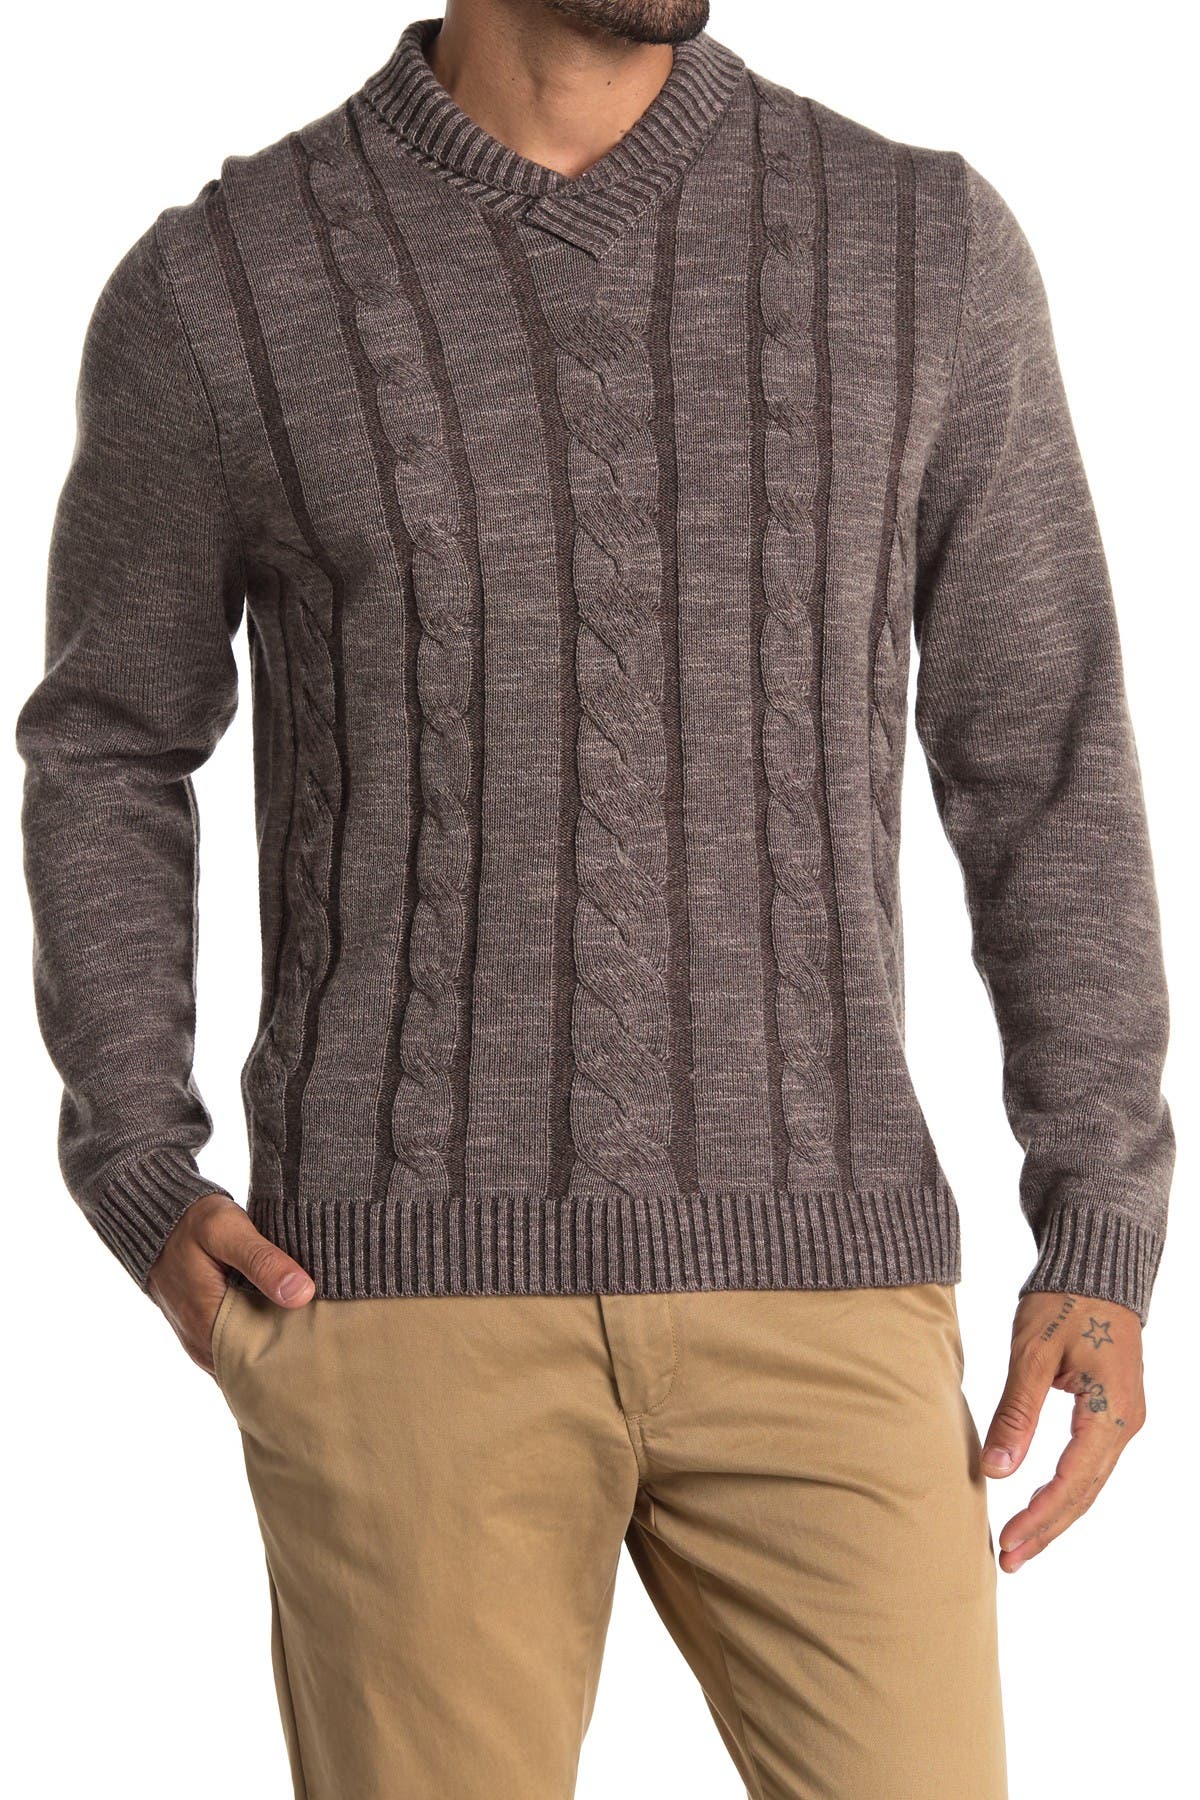 tommy bahama cashmere sweater